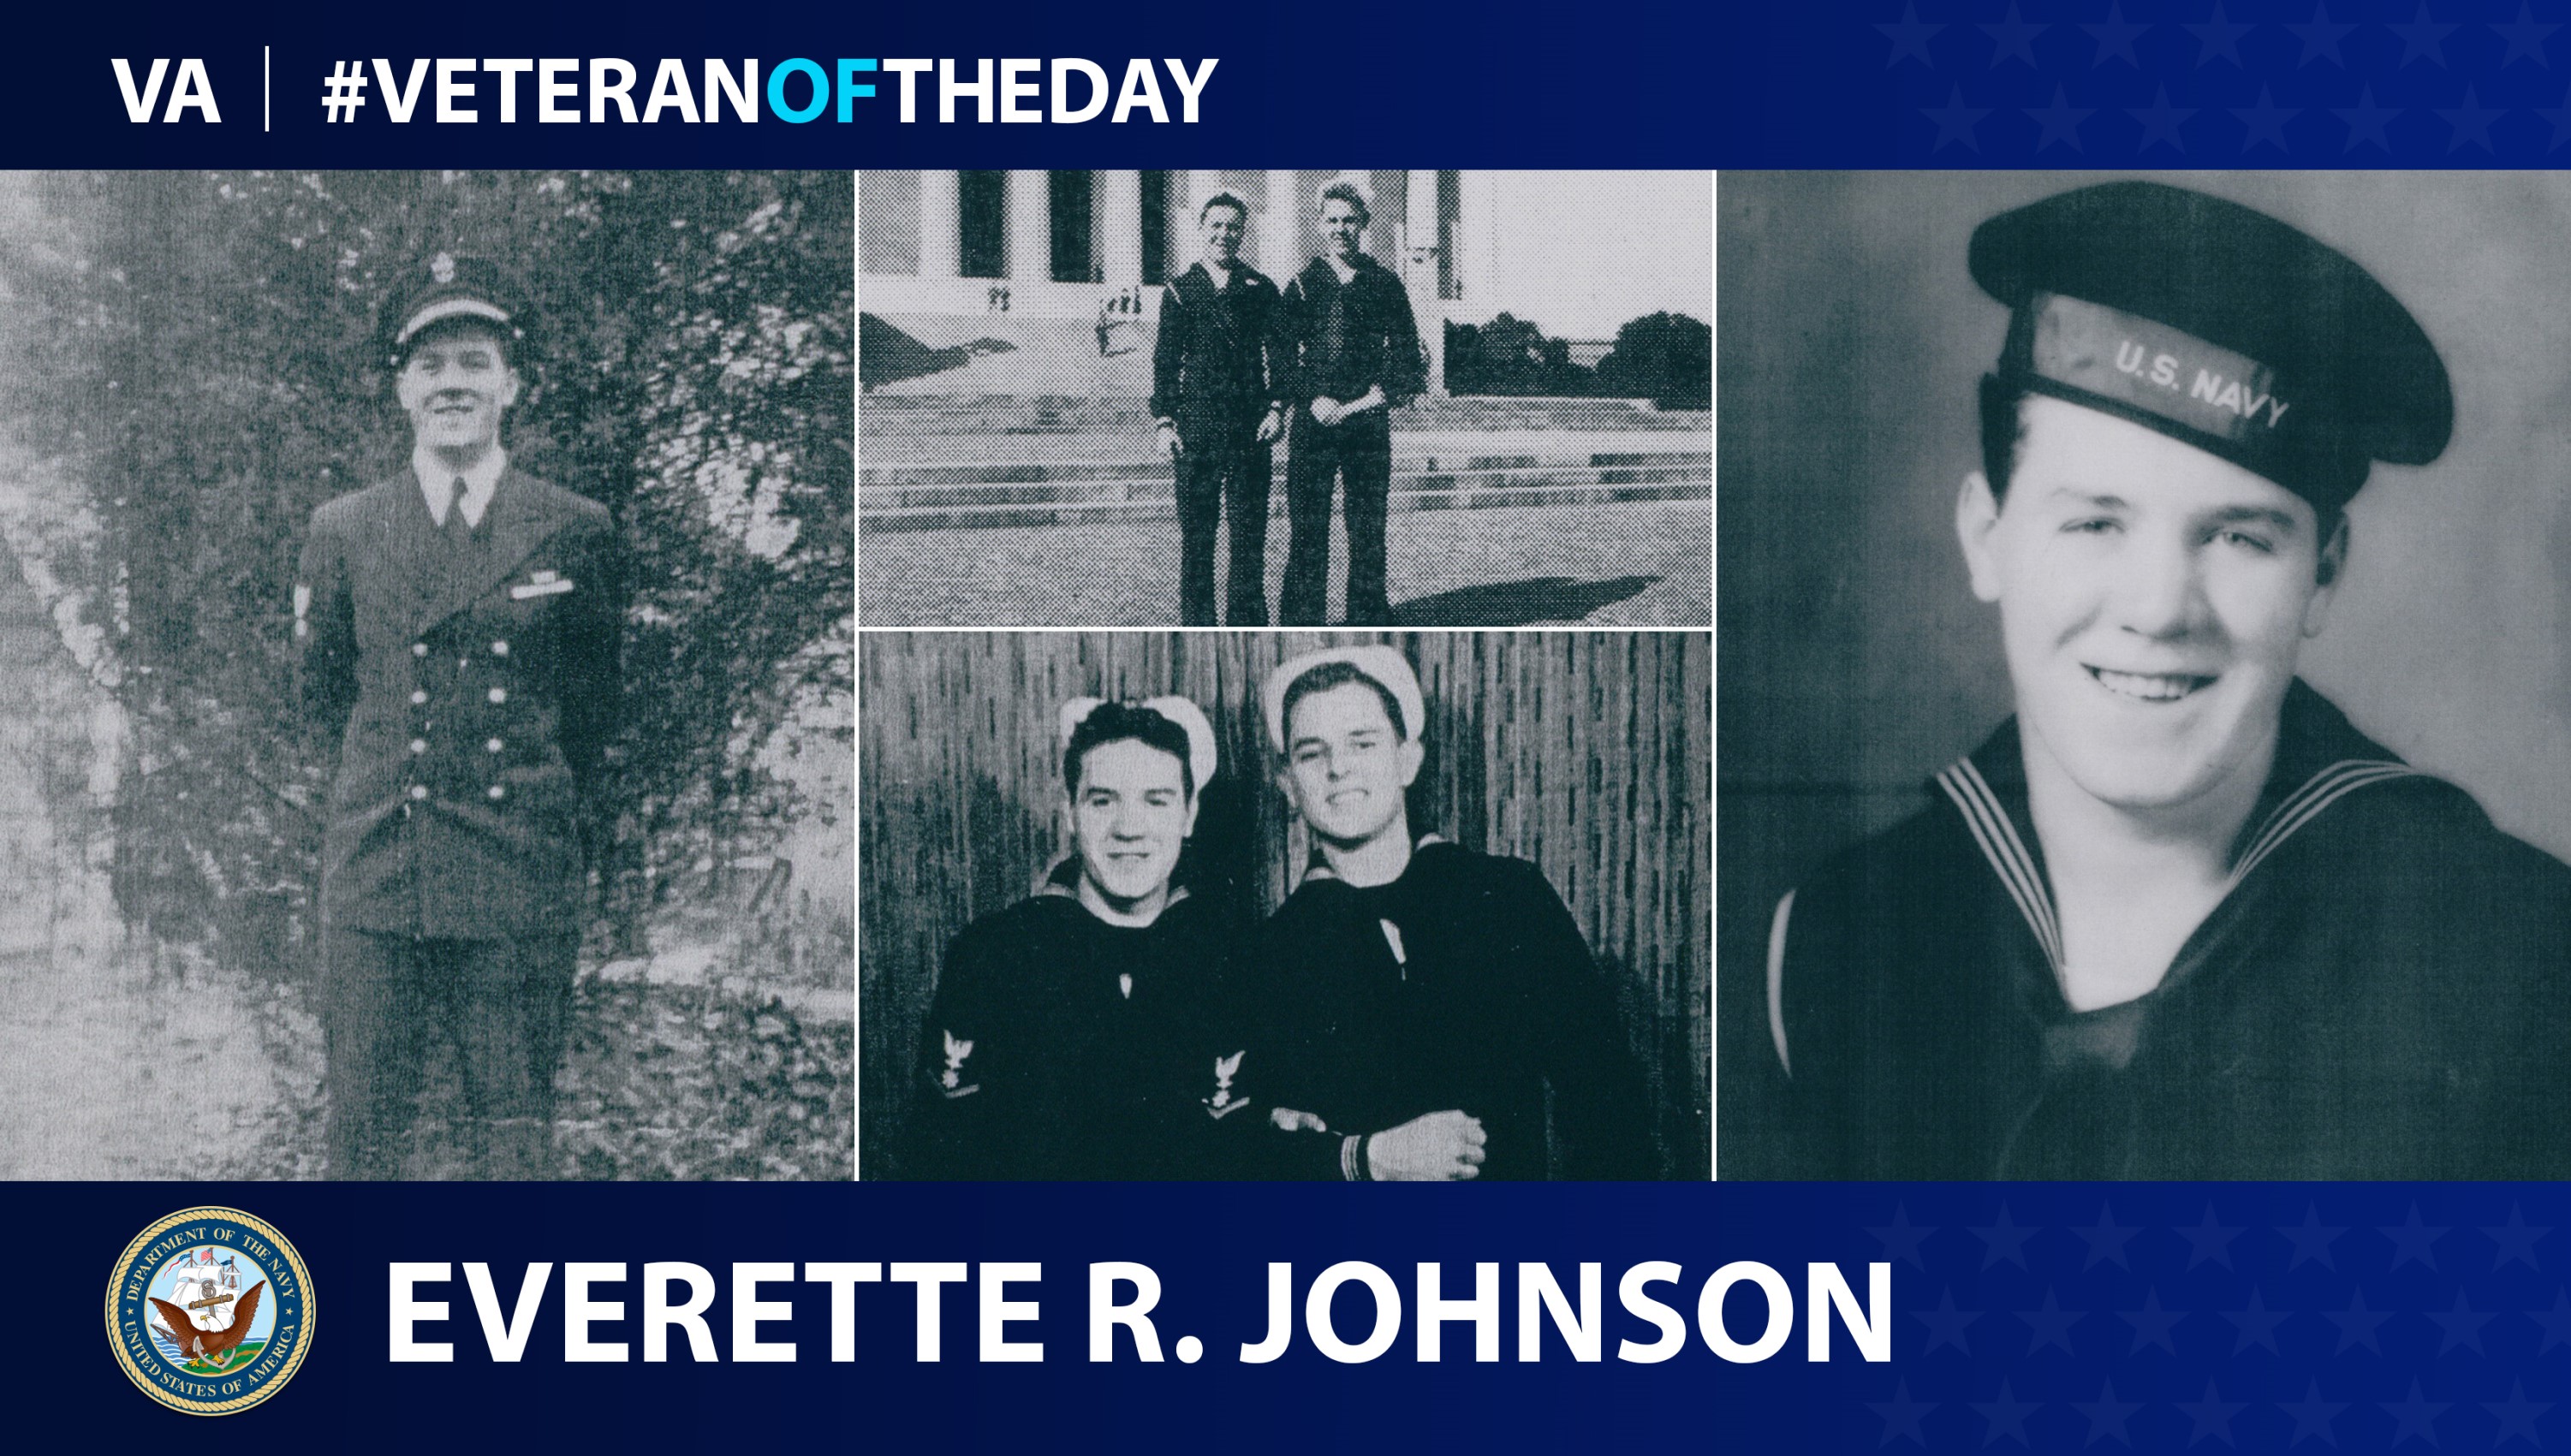 Navy Veteran Everette R. Johnson is today's Veteran of the Day.